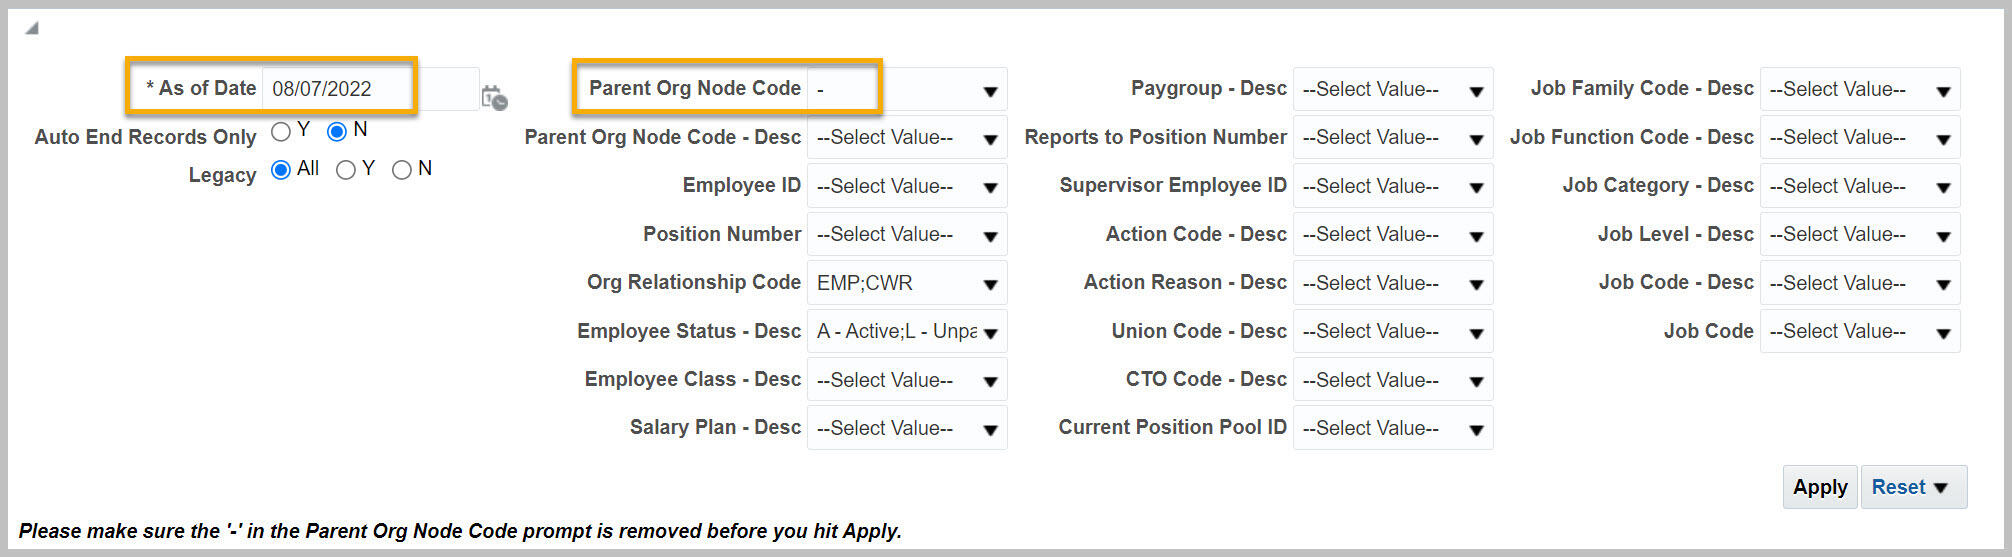 Filters for Workforce Detail, Job Data As of Date